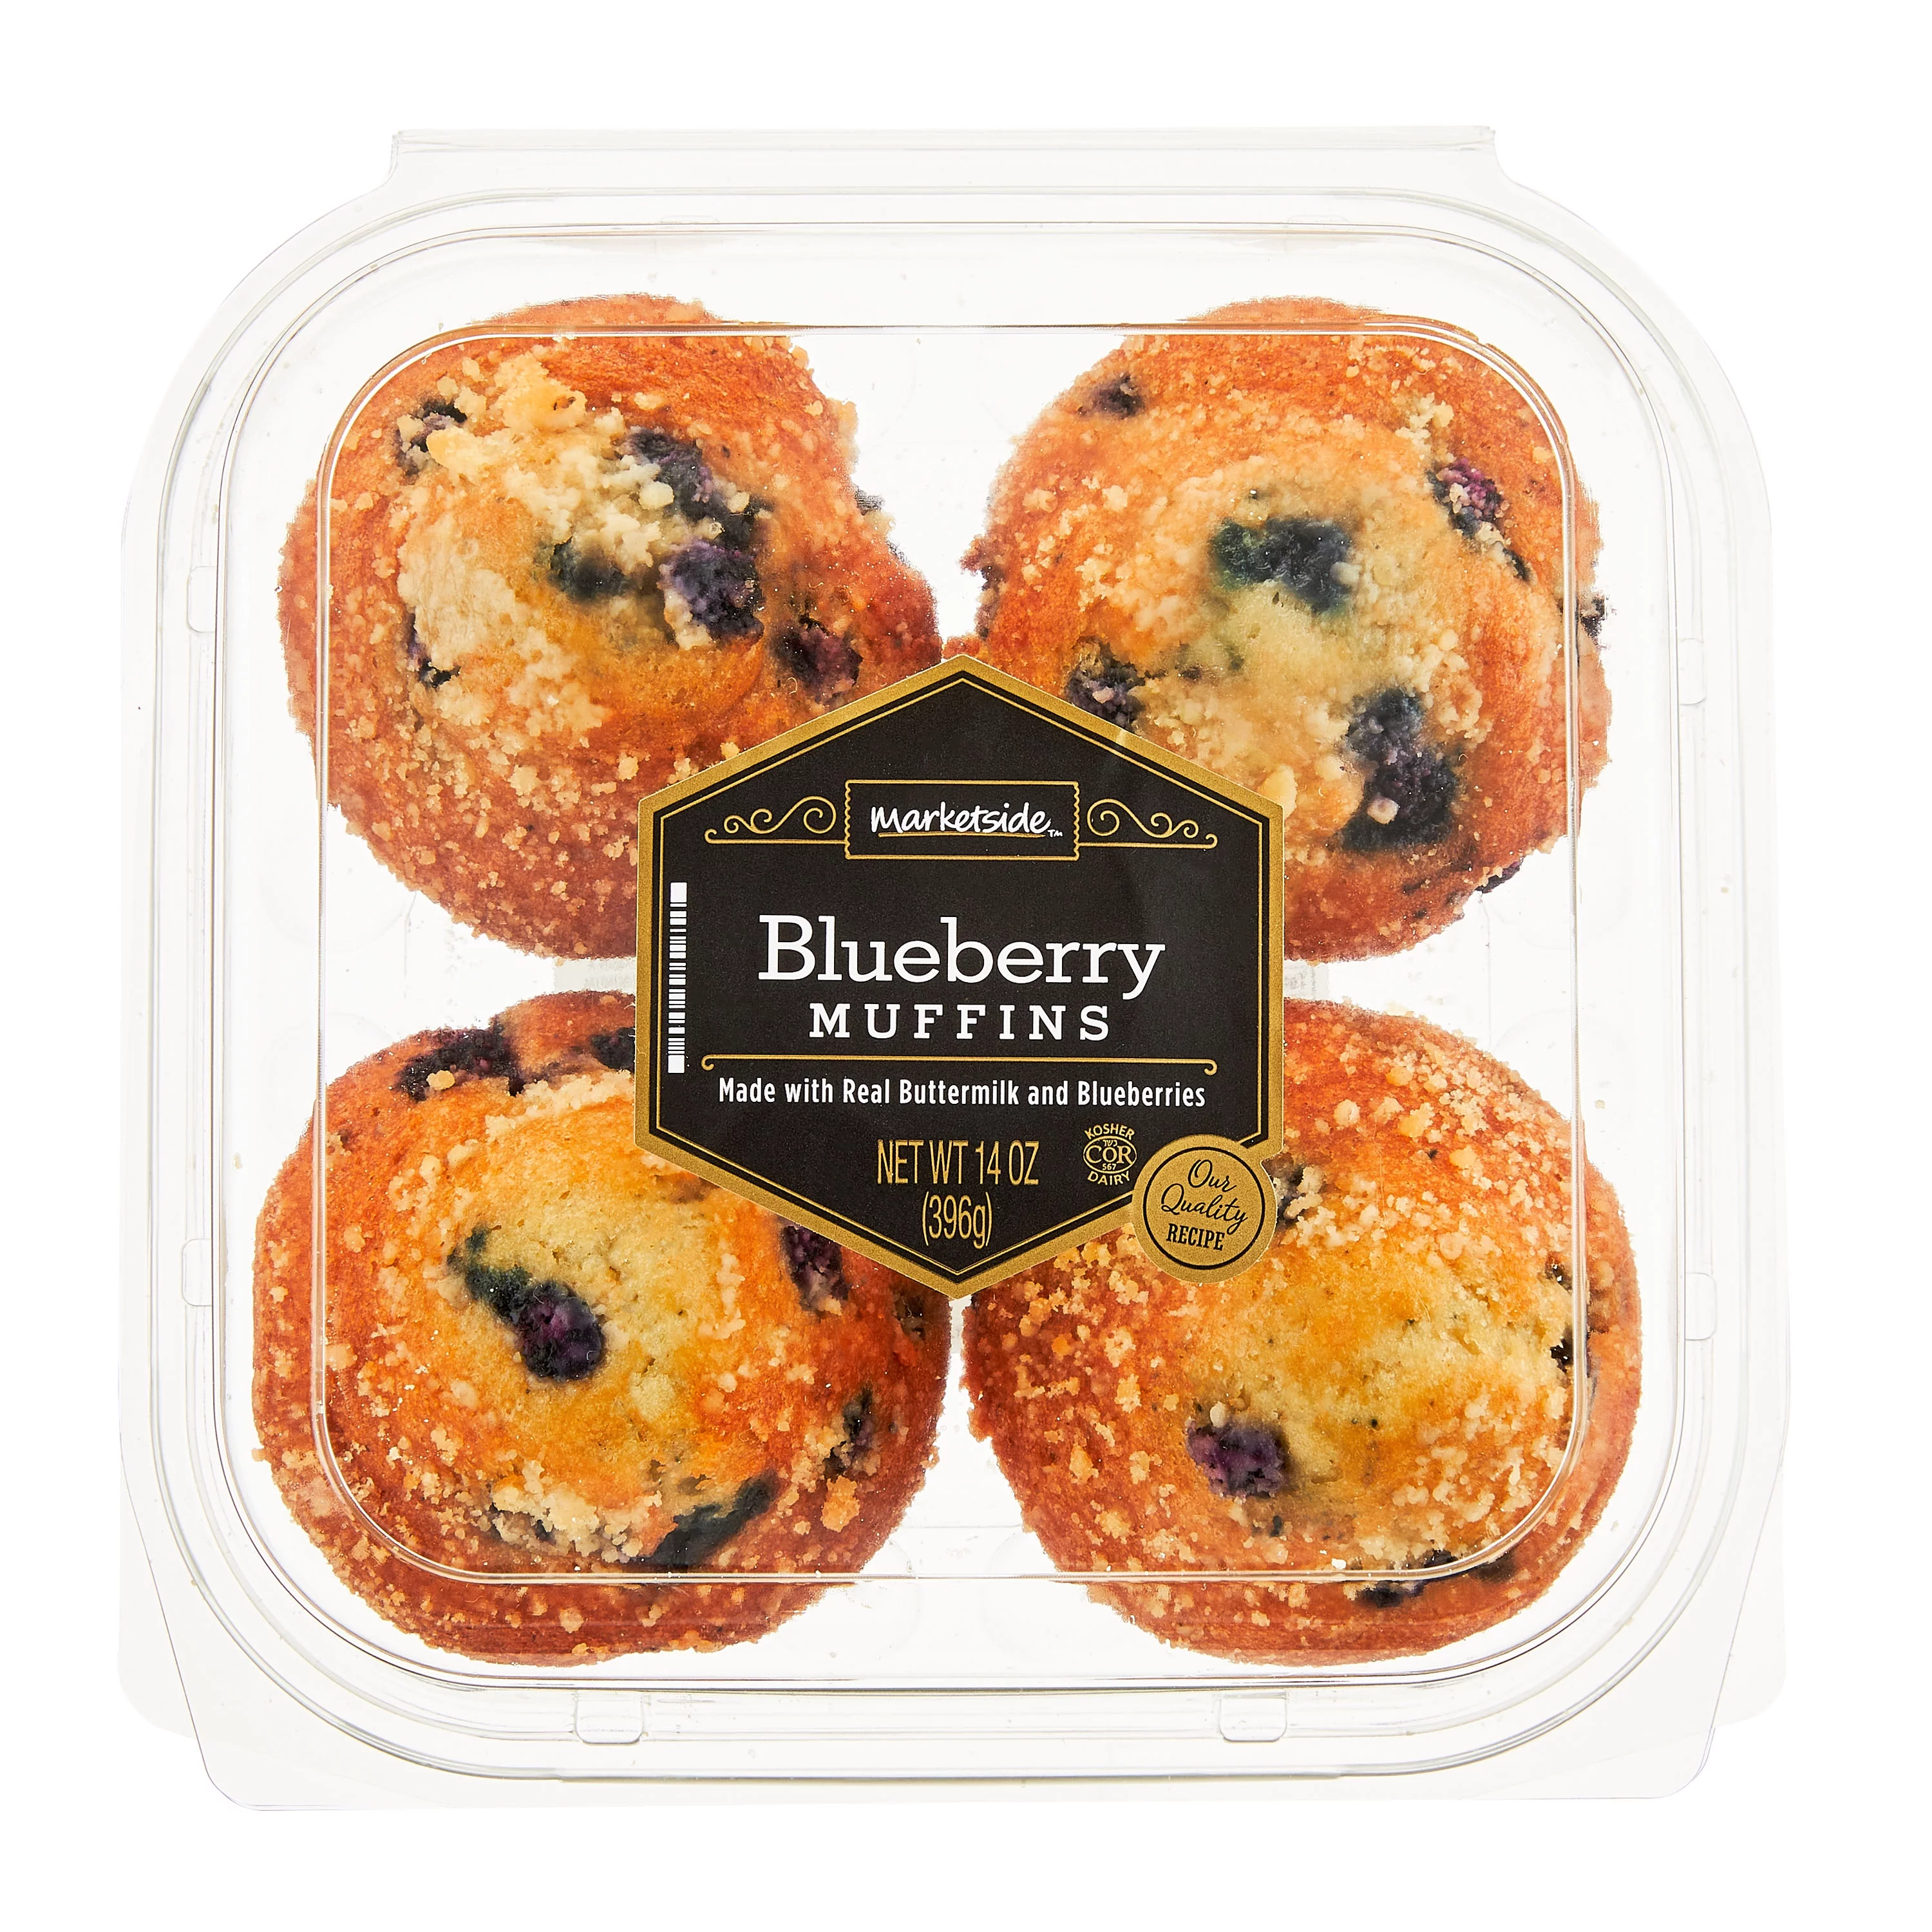 The Bakery at Walmart Blueberry Muffins, 4 count, 14 oz